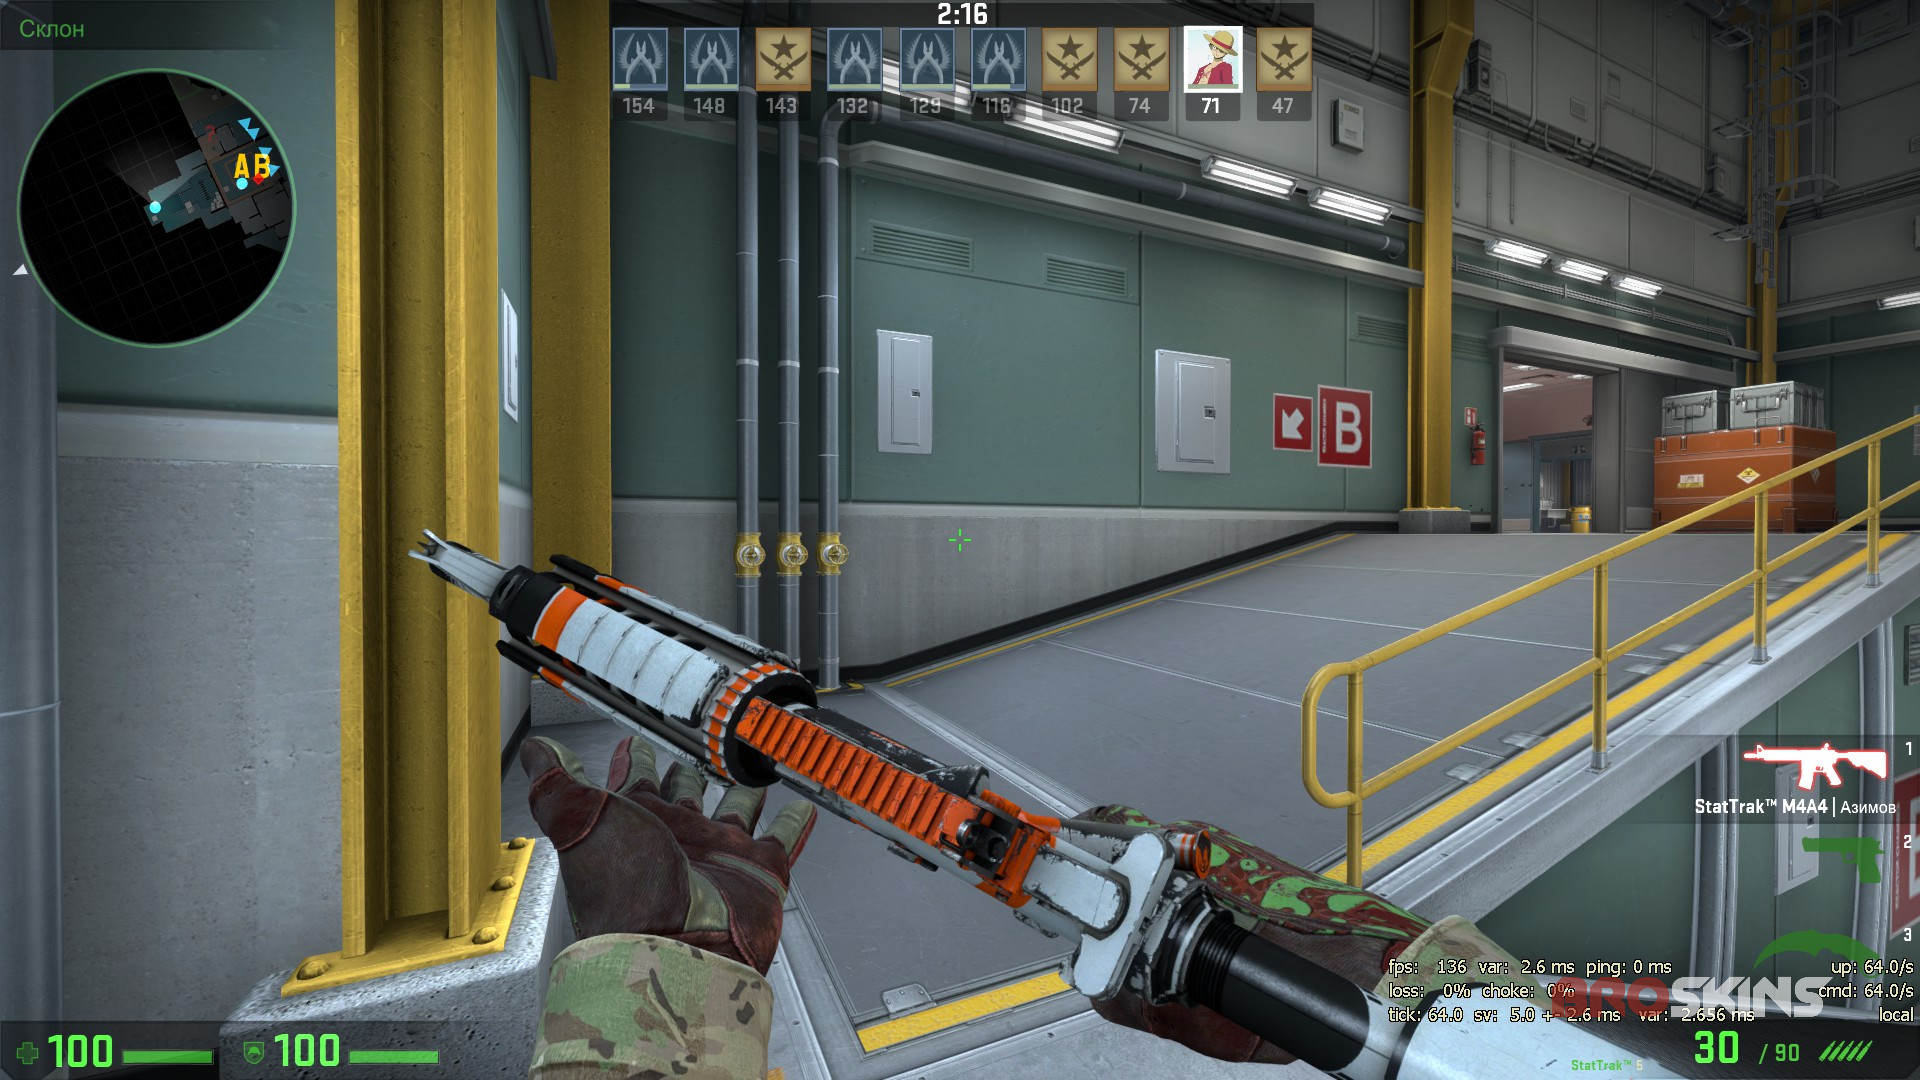 Sport Gloves Bronze Morph  and M4A4  Asiimov with iBUYPOWER (Holo) Katowice 2014